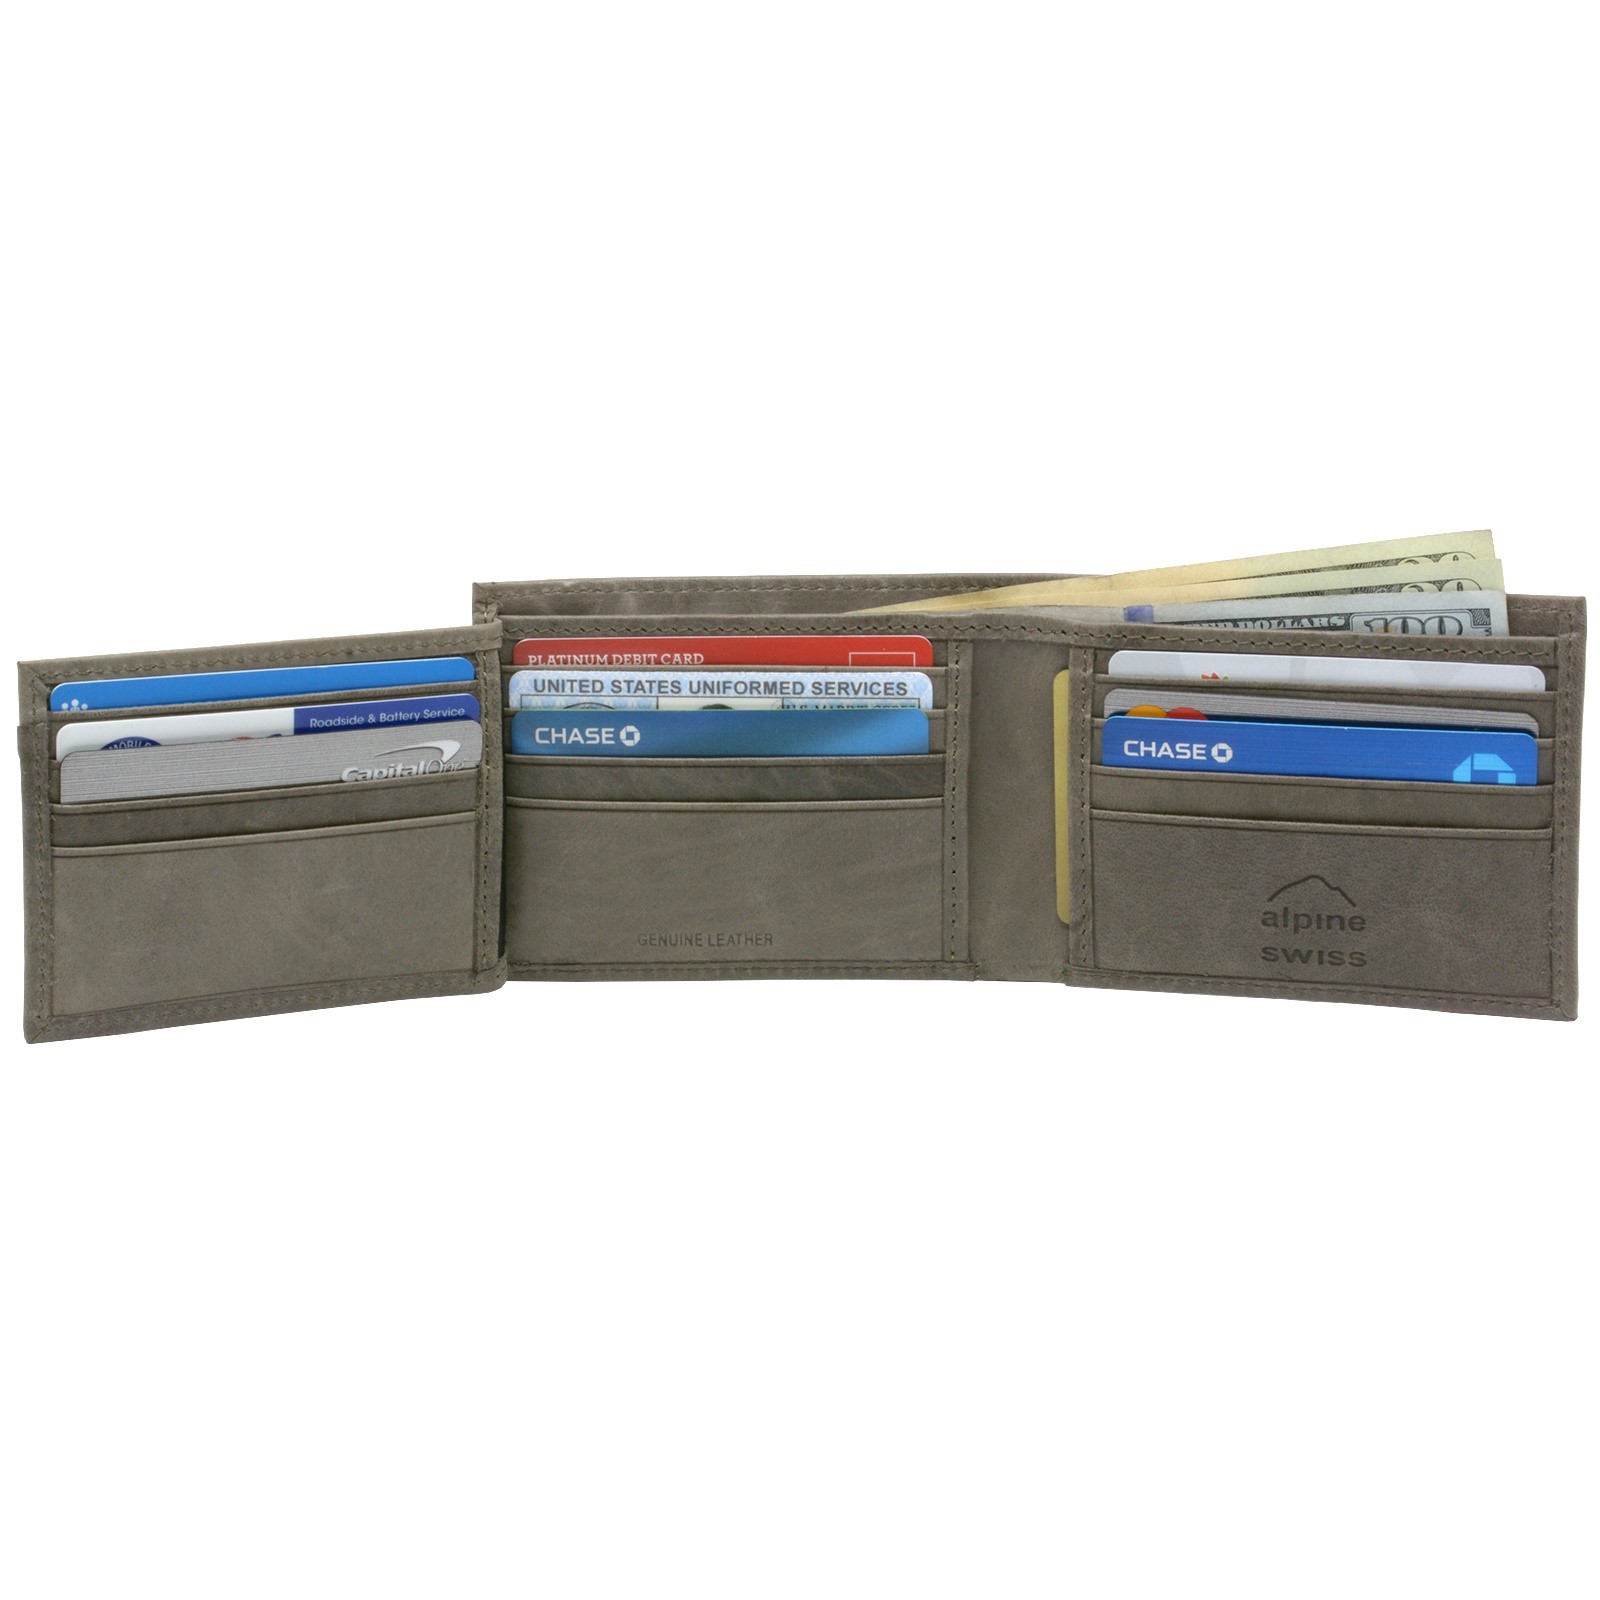 Alpine Swiss Mens Wallet Real Leather Bifold Trifold Hybrid Foldout ID Card Case - image 3 of 4